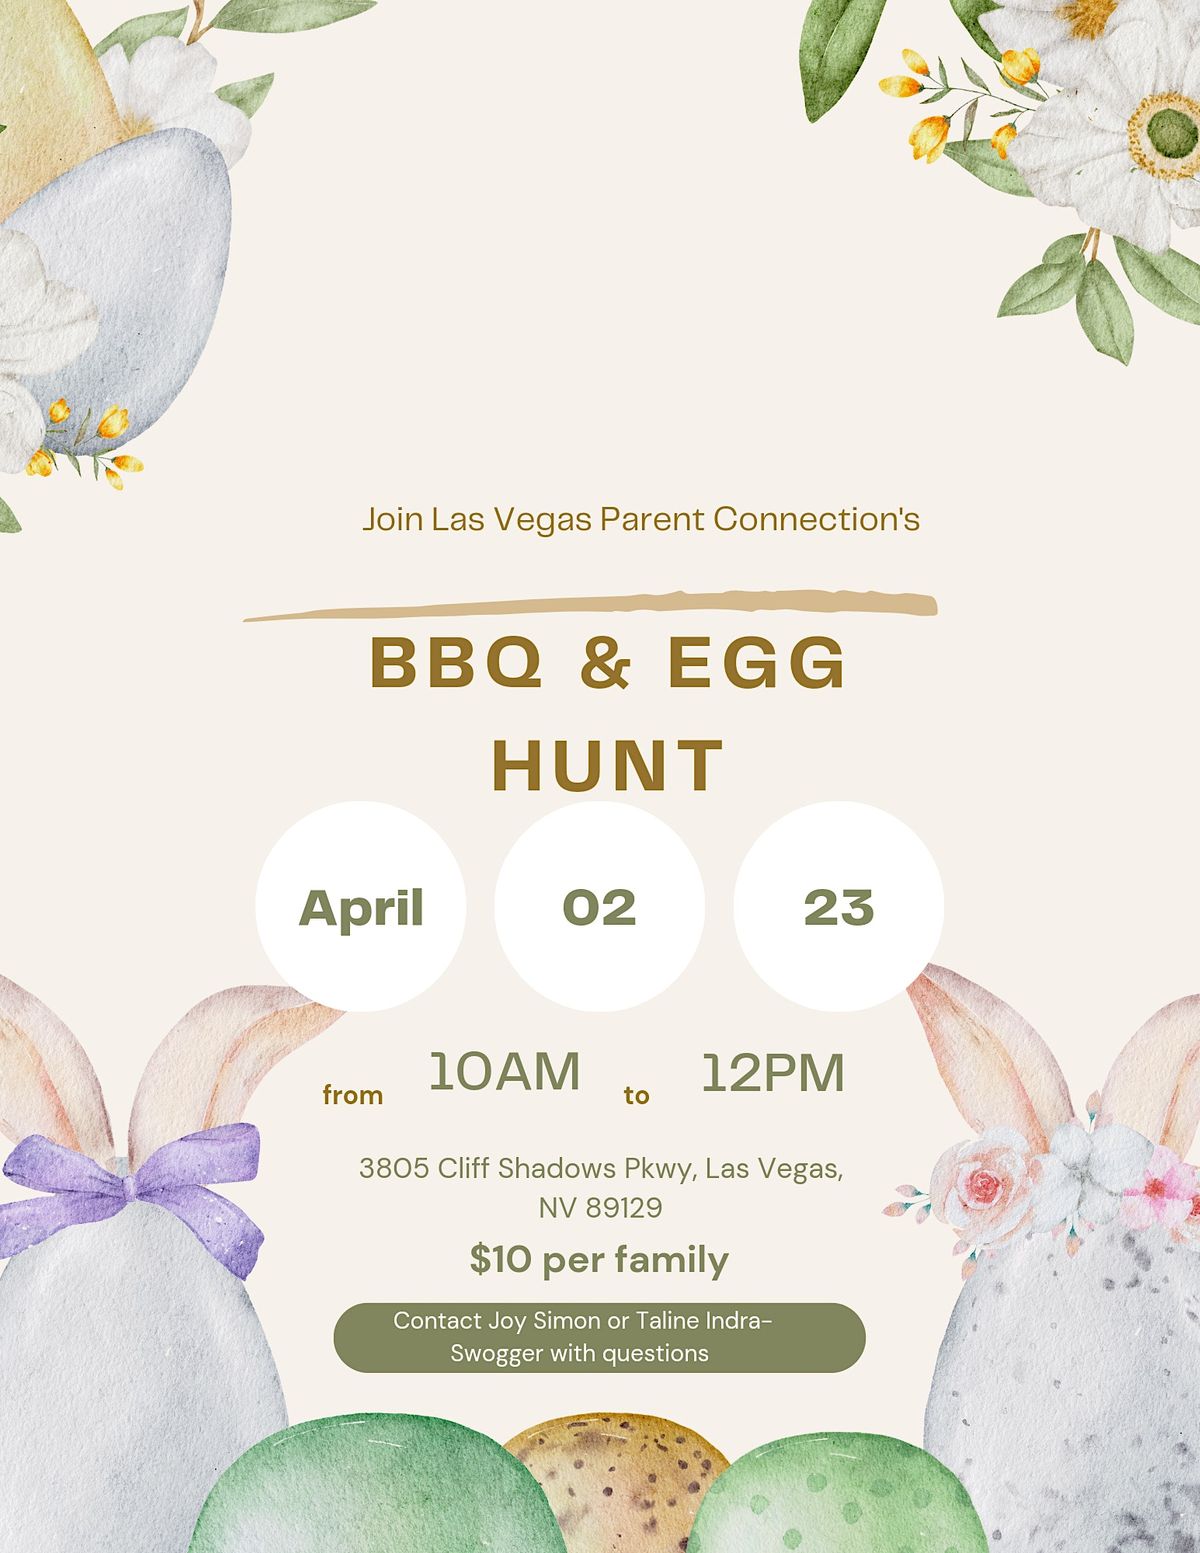 EASTER EGG HUNT AND BBQ